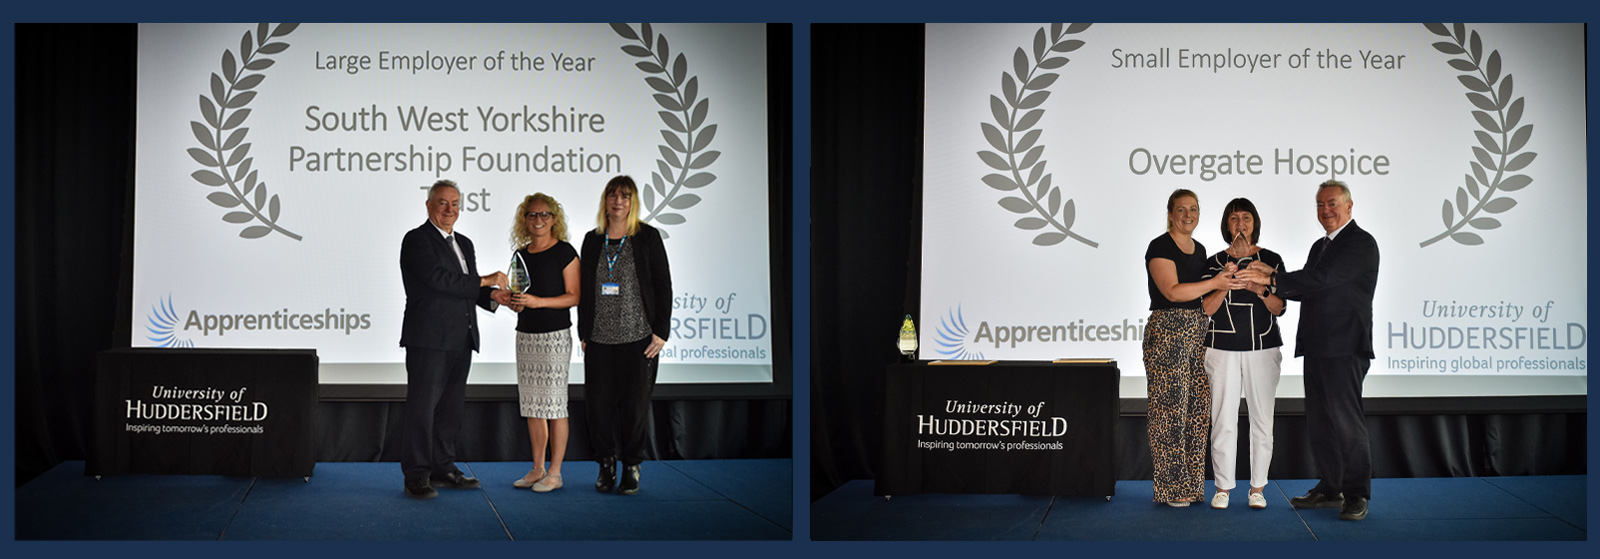 Small Employer of the Year and Large Employer of the Year were also presented